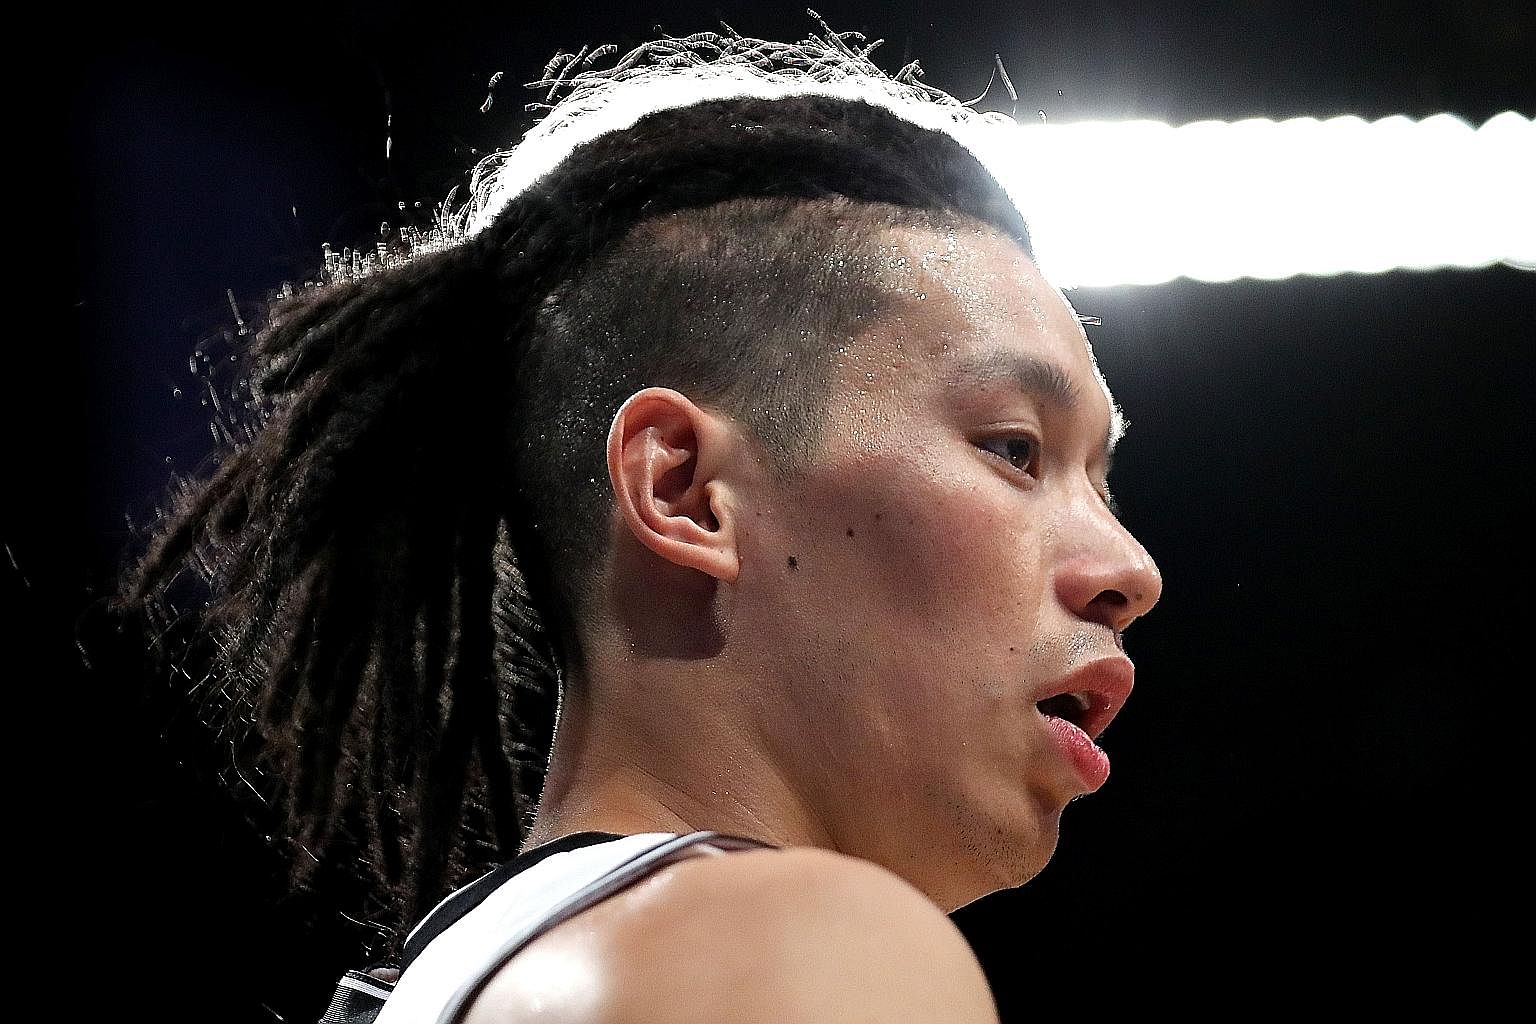 Jeremy Lin of the Brooklyn Nets with his dreadlocks hairdo against the Miami Heat in a pre-season game last Thursday. His measured response to accusations of cultural appropriation avoided a possible unsavoury spat.